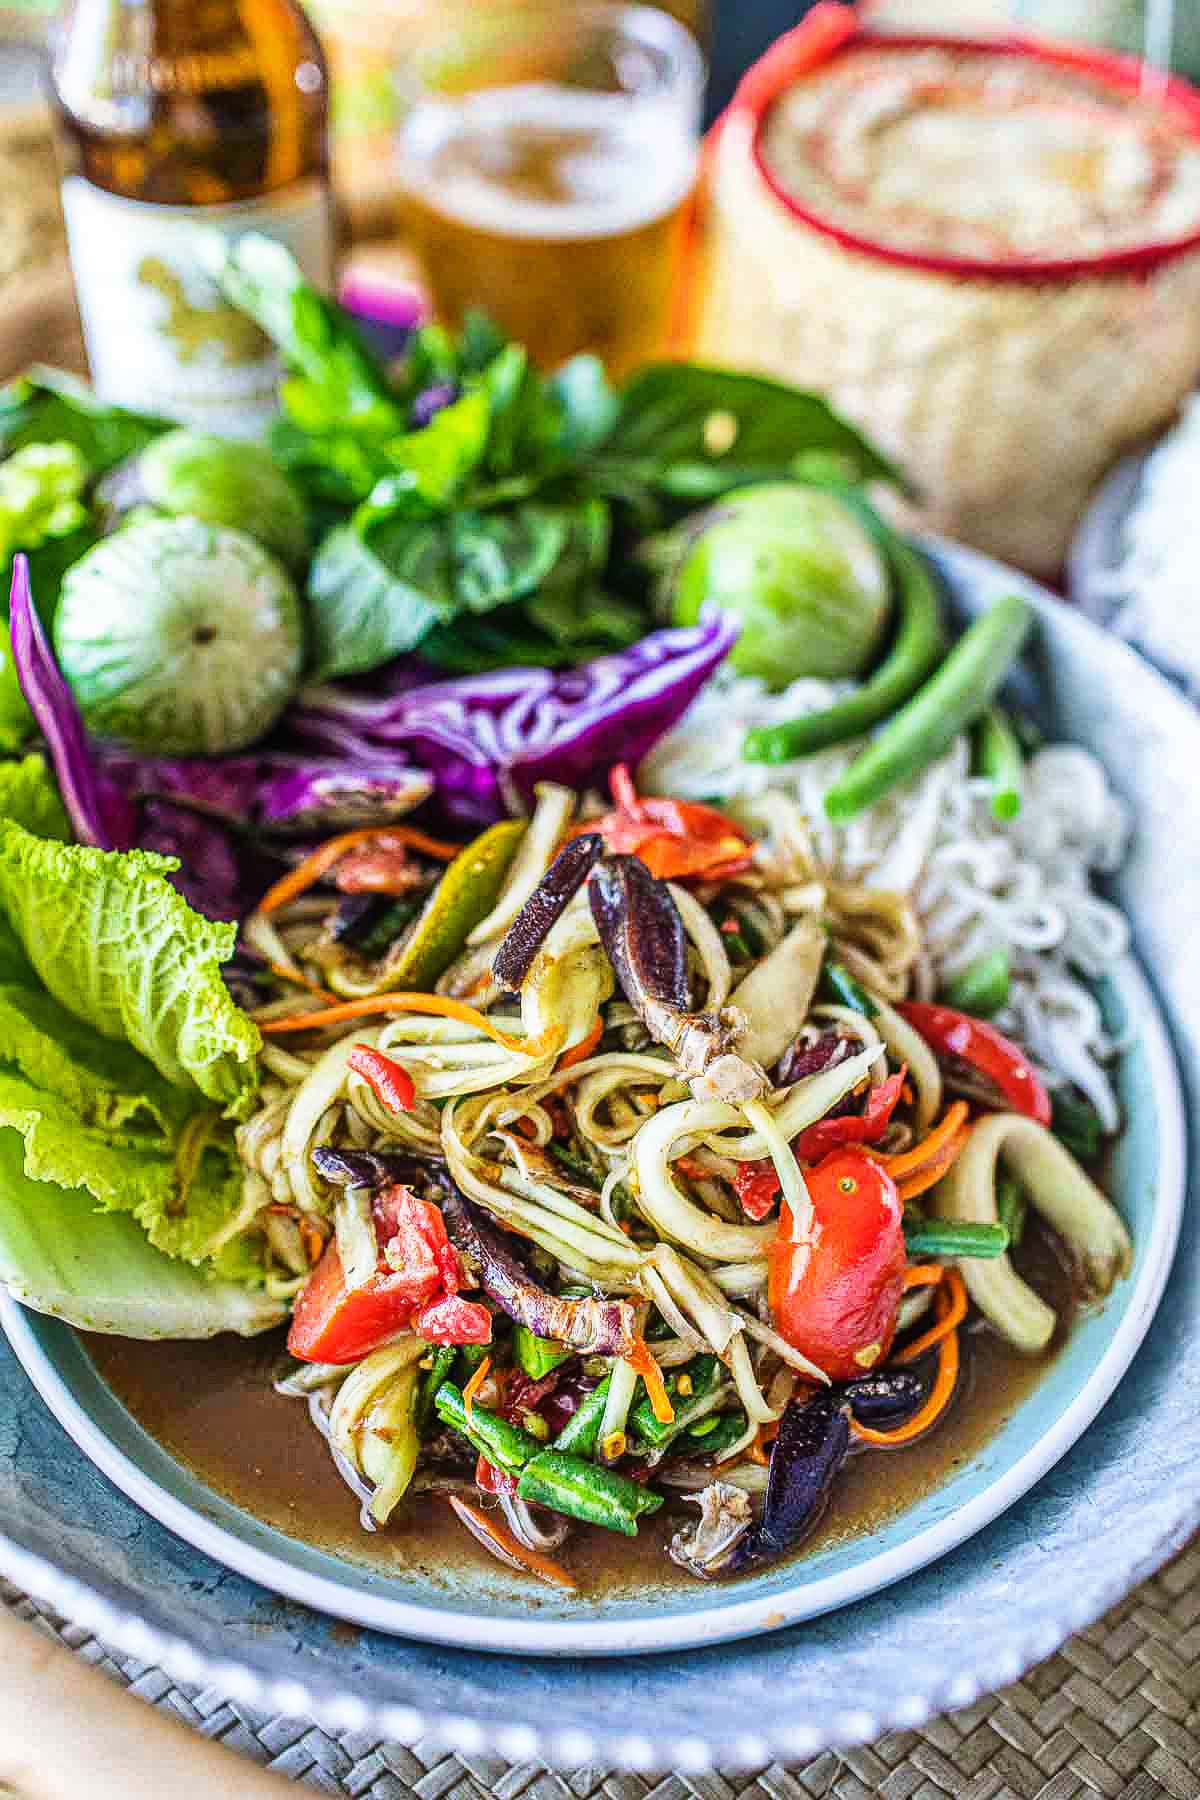 lao papaya salad in a plate with fresh veggies garnish on a table